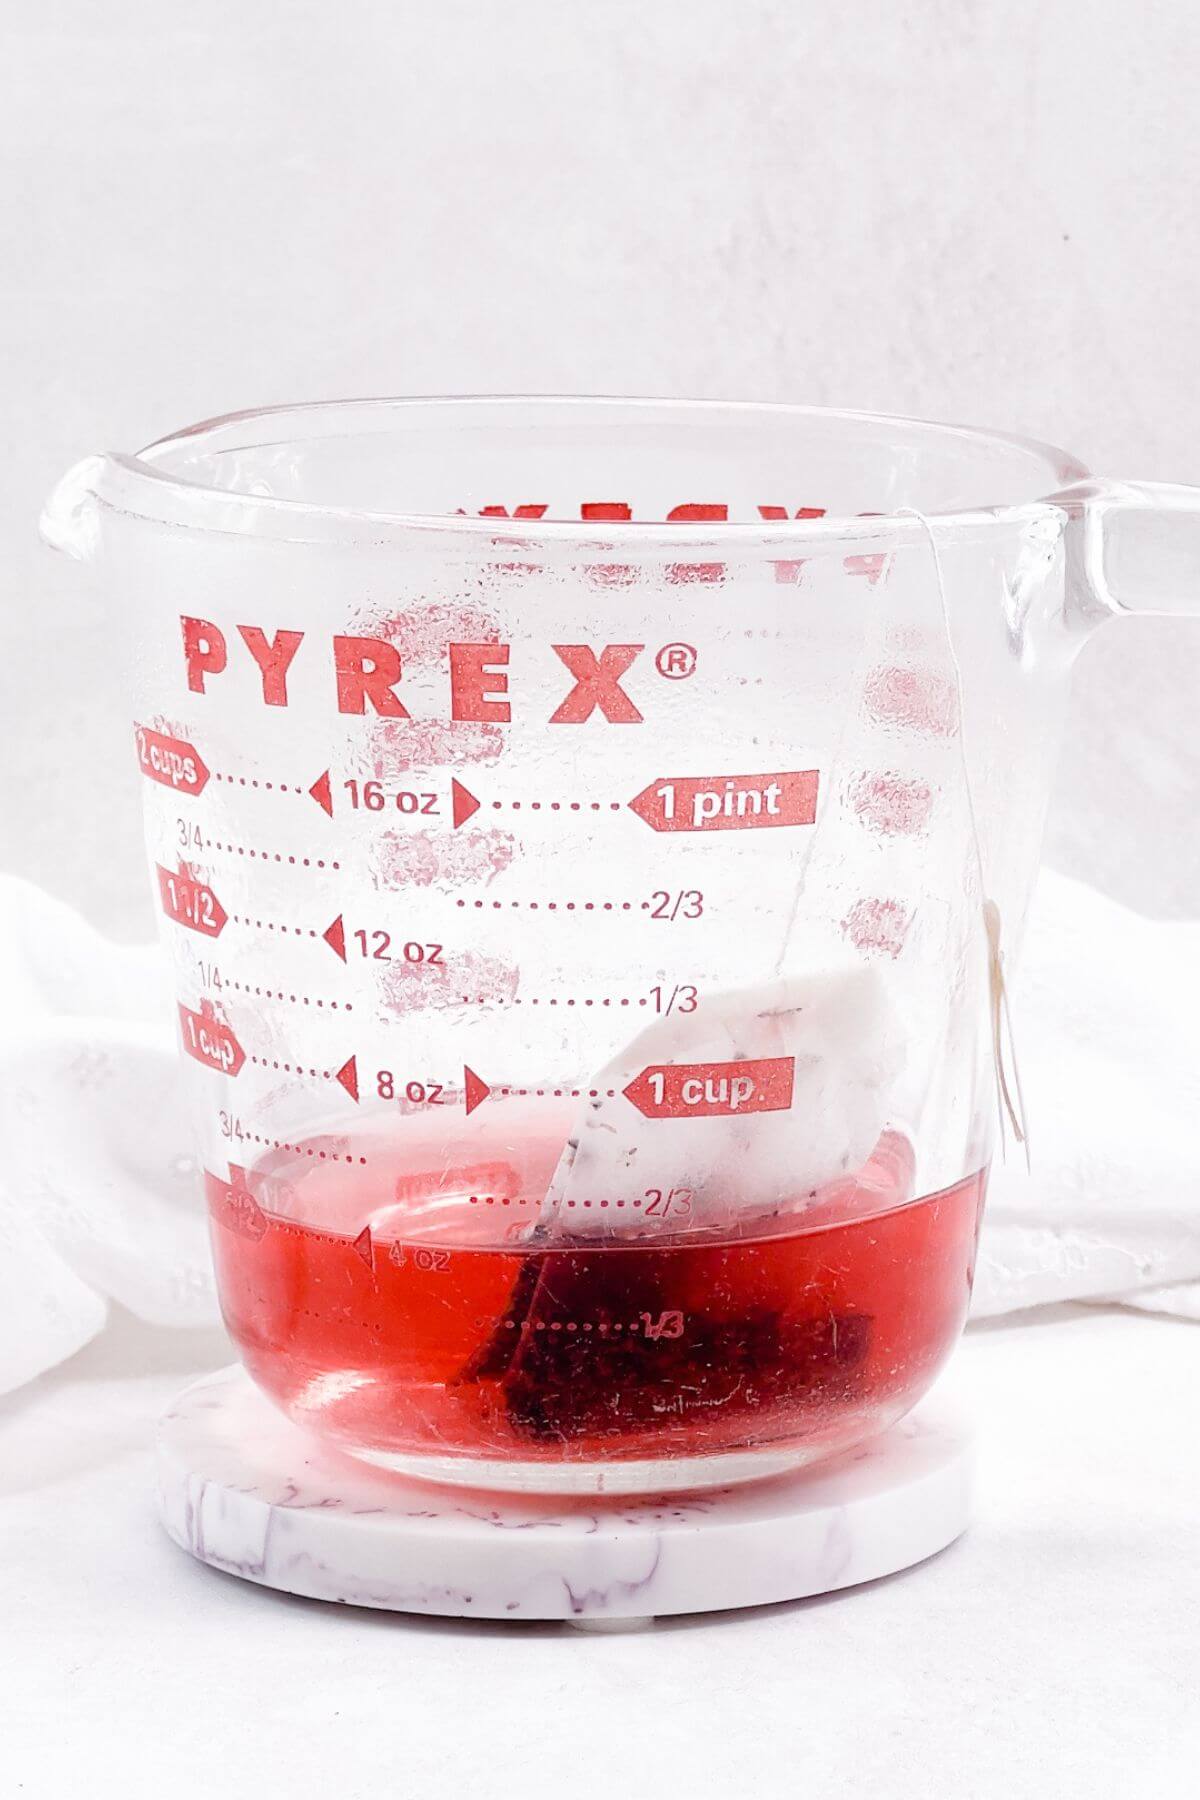 Brewing Tazo Passion Herbal Tea bag in Pyrex cup.